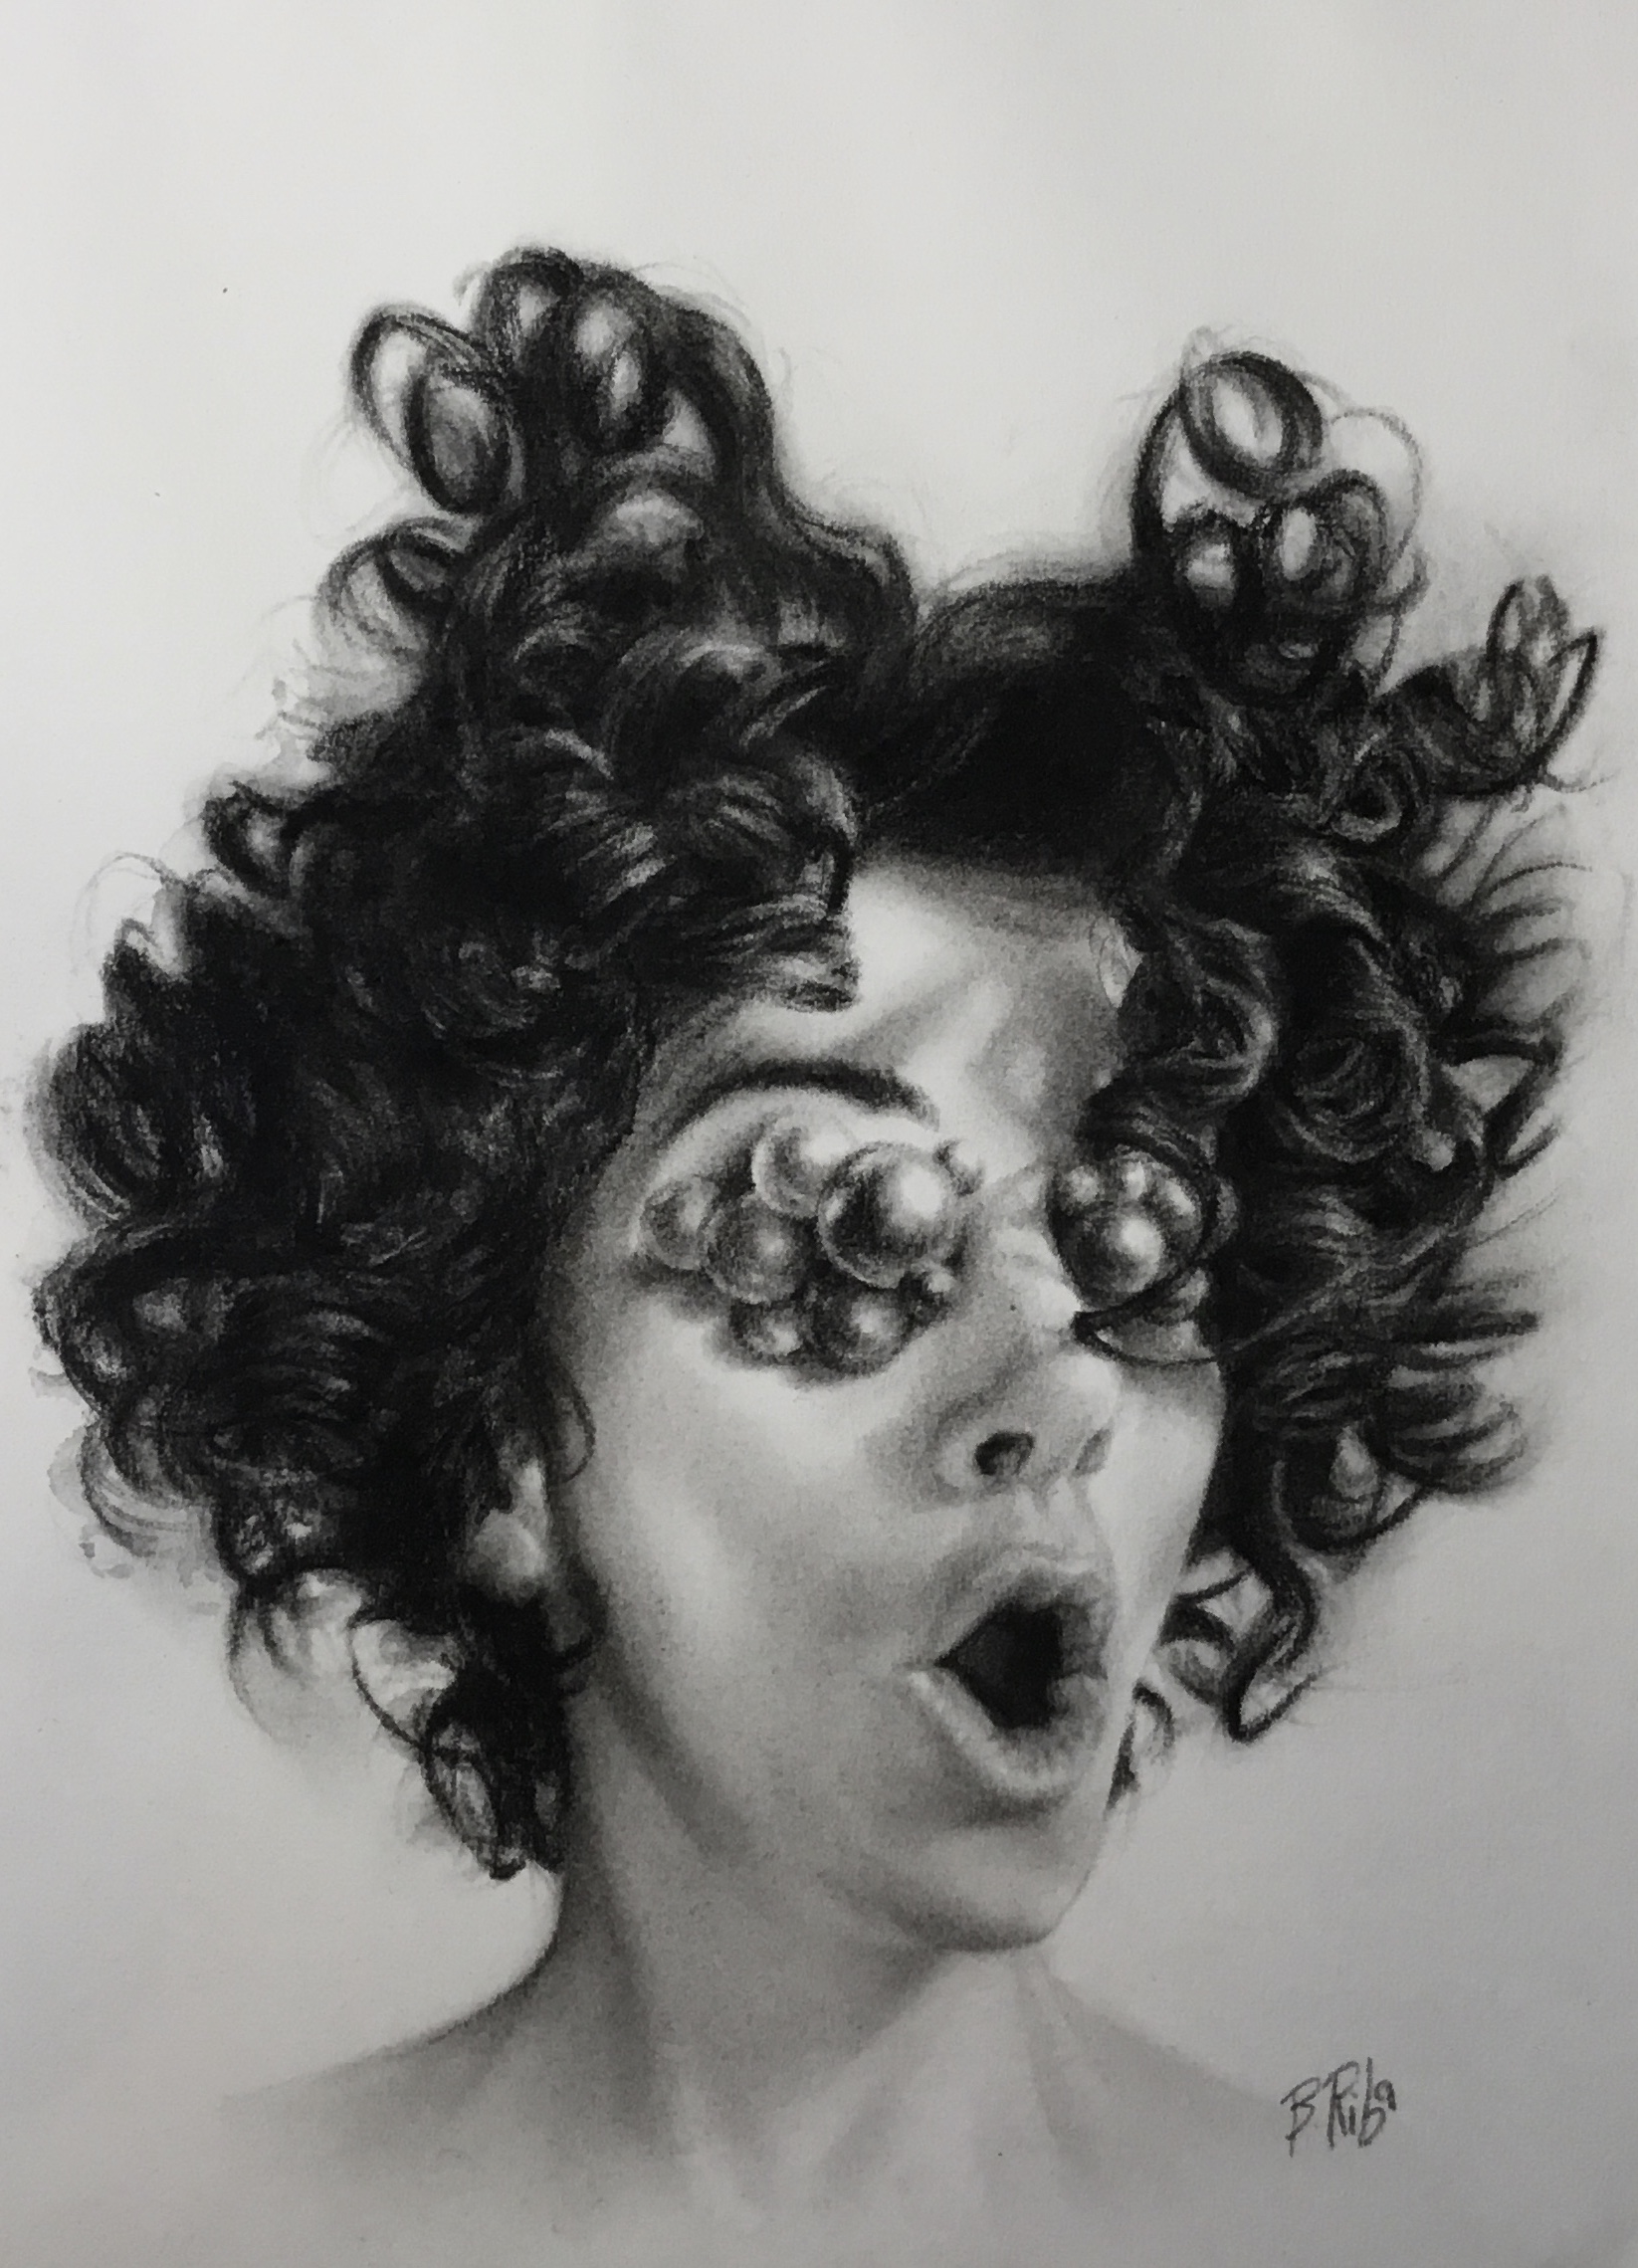 “Atomic”. Charcoal on paper/ Carboncillo sobre papel